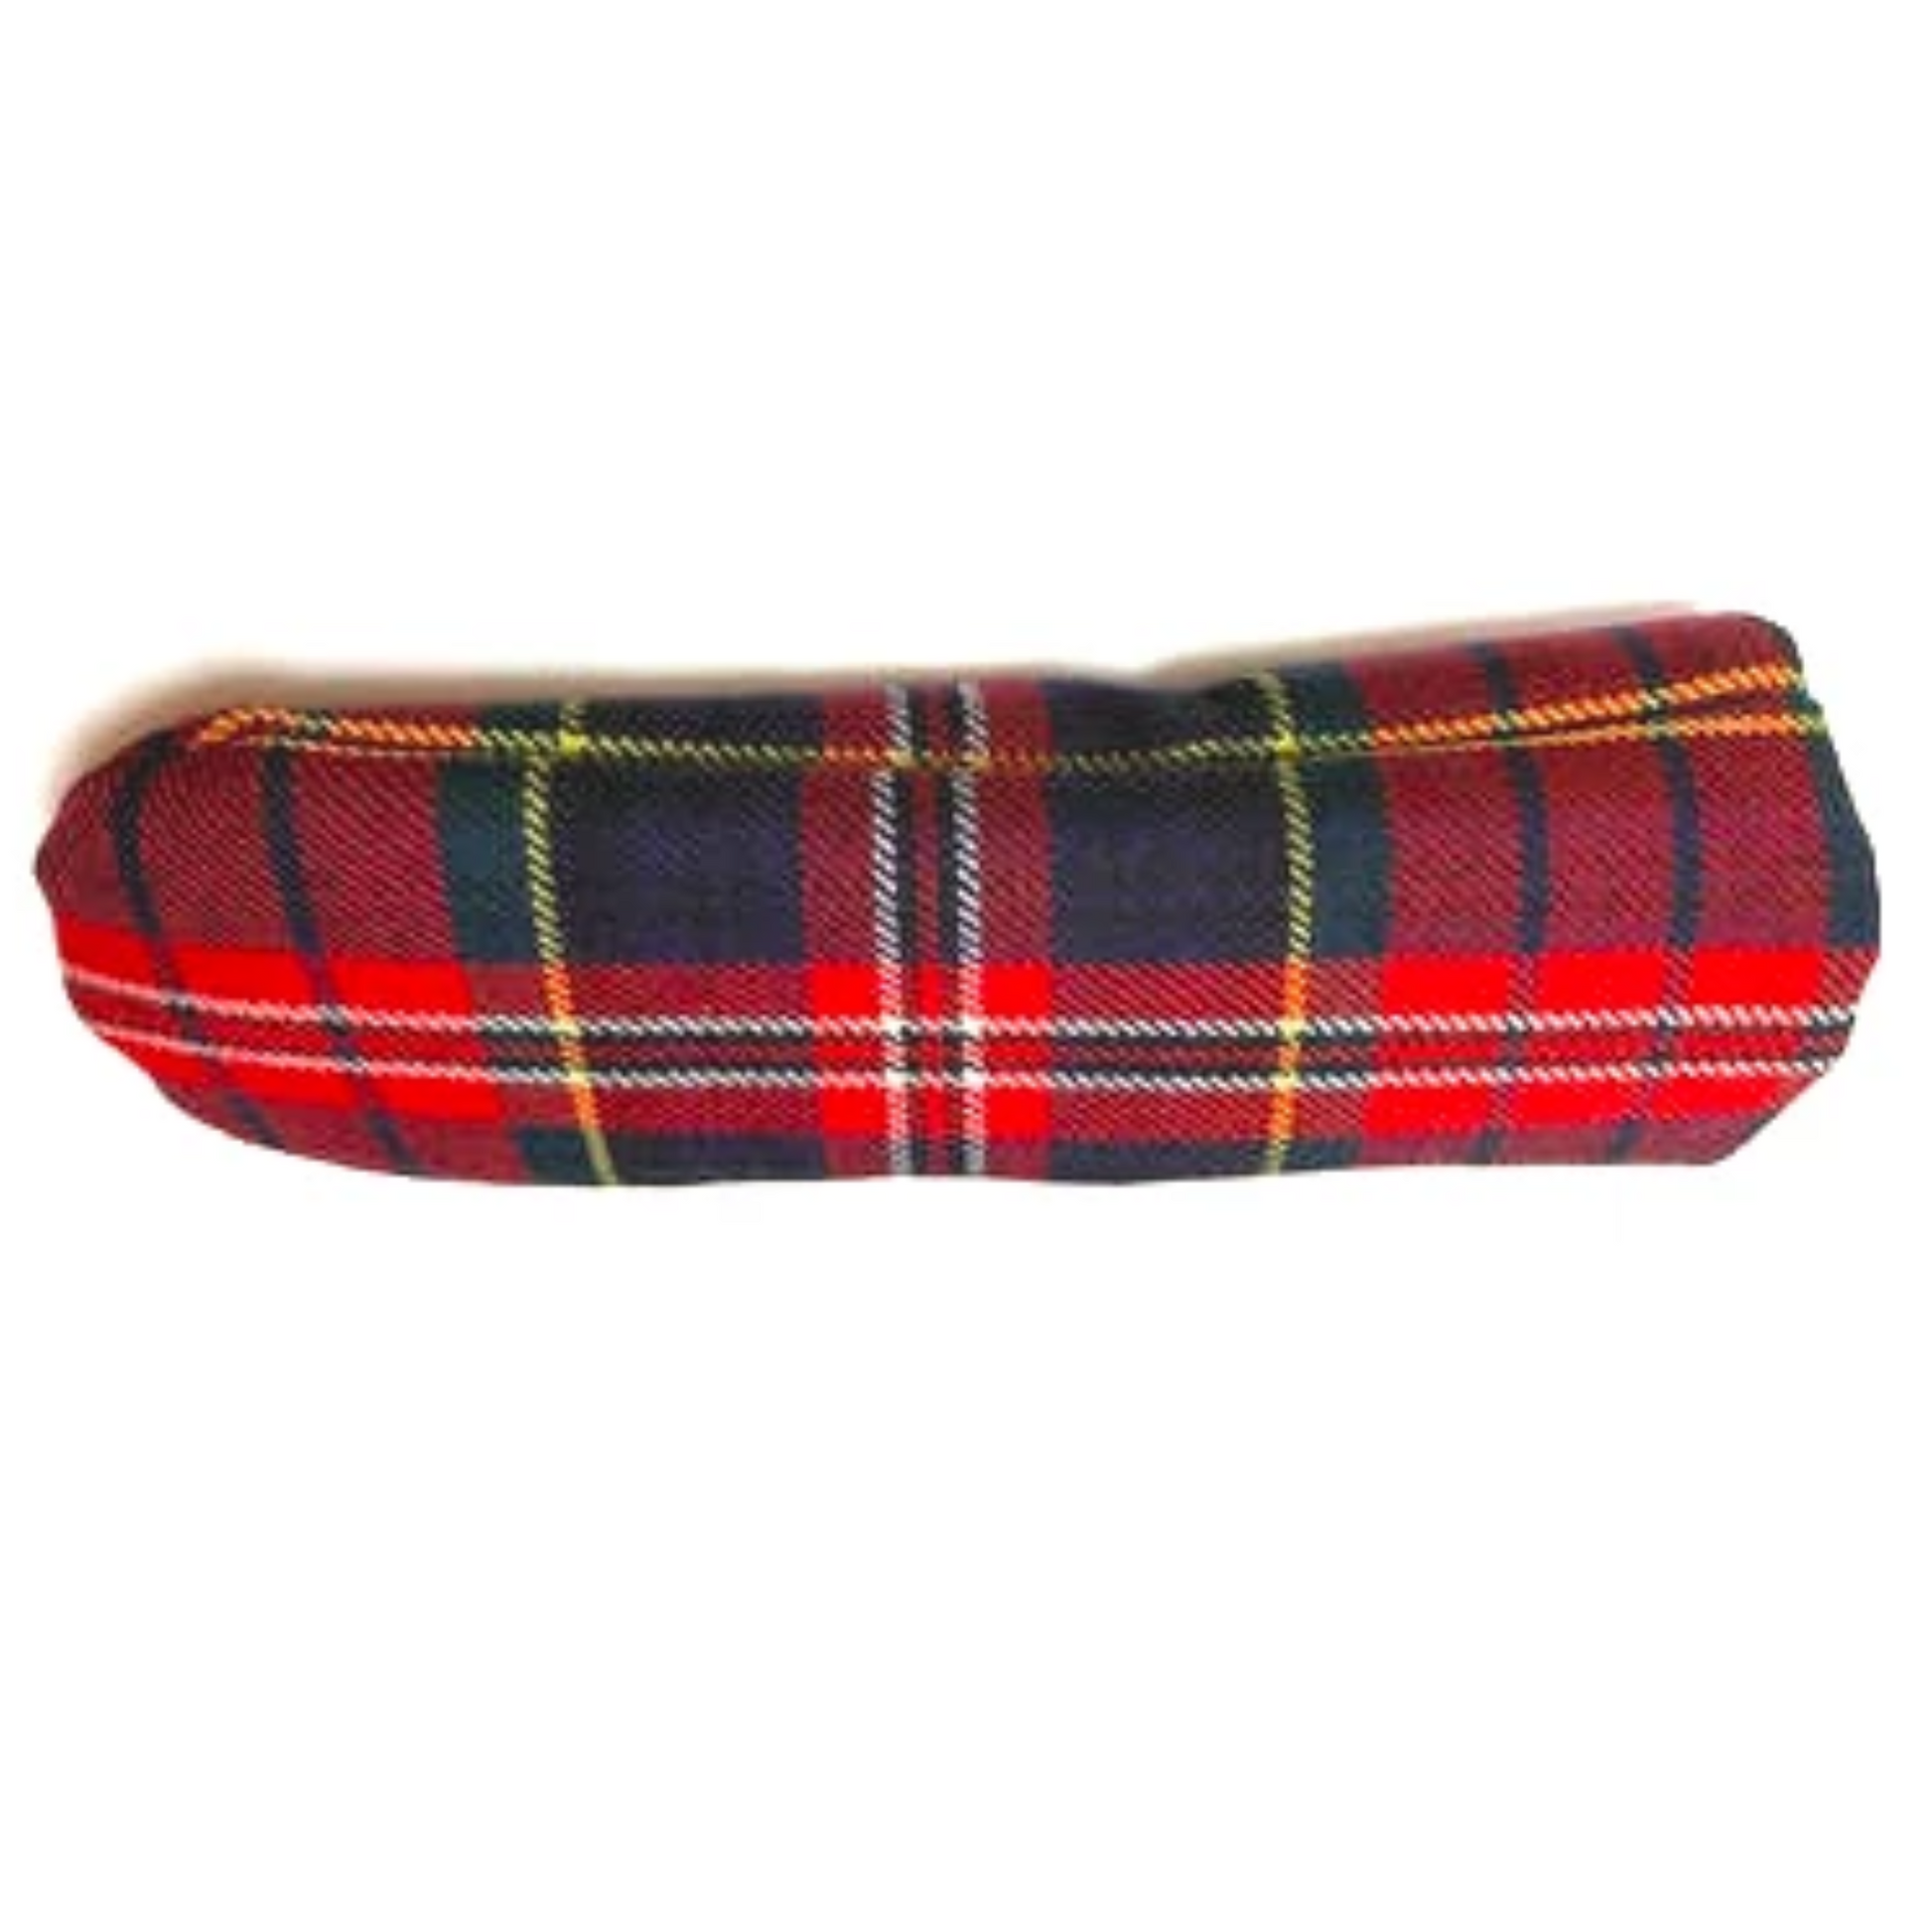 Red and navy tartan golf head cover made fro Scottish wool with gold thread throughout the classic plaid. 